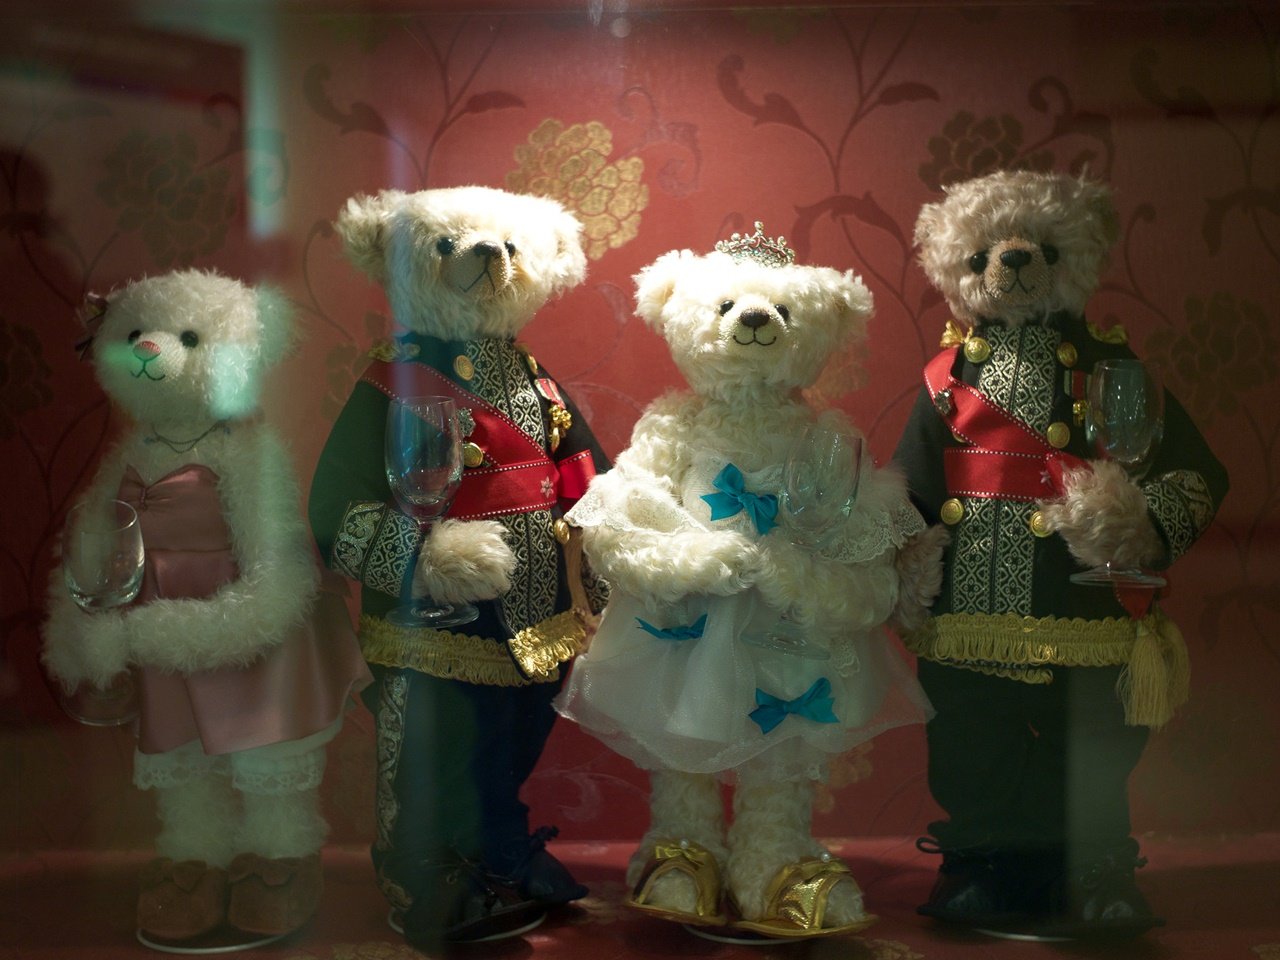 Teddy bears dressed up as characters from Goong at the Teddy Bear Museum